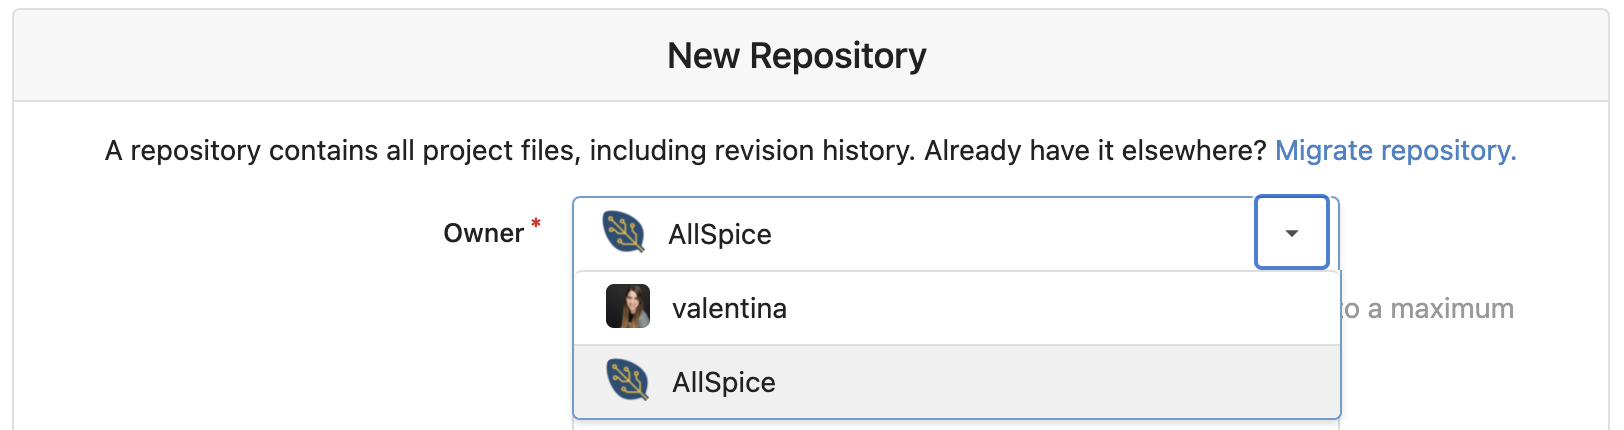 New repository page owner selection. Drop-down menu is expanded.